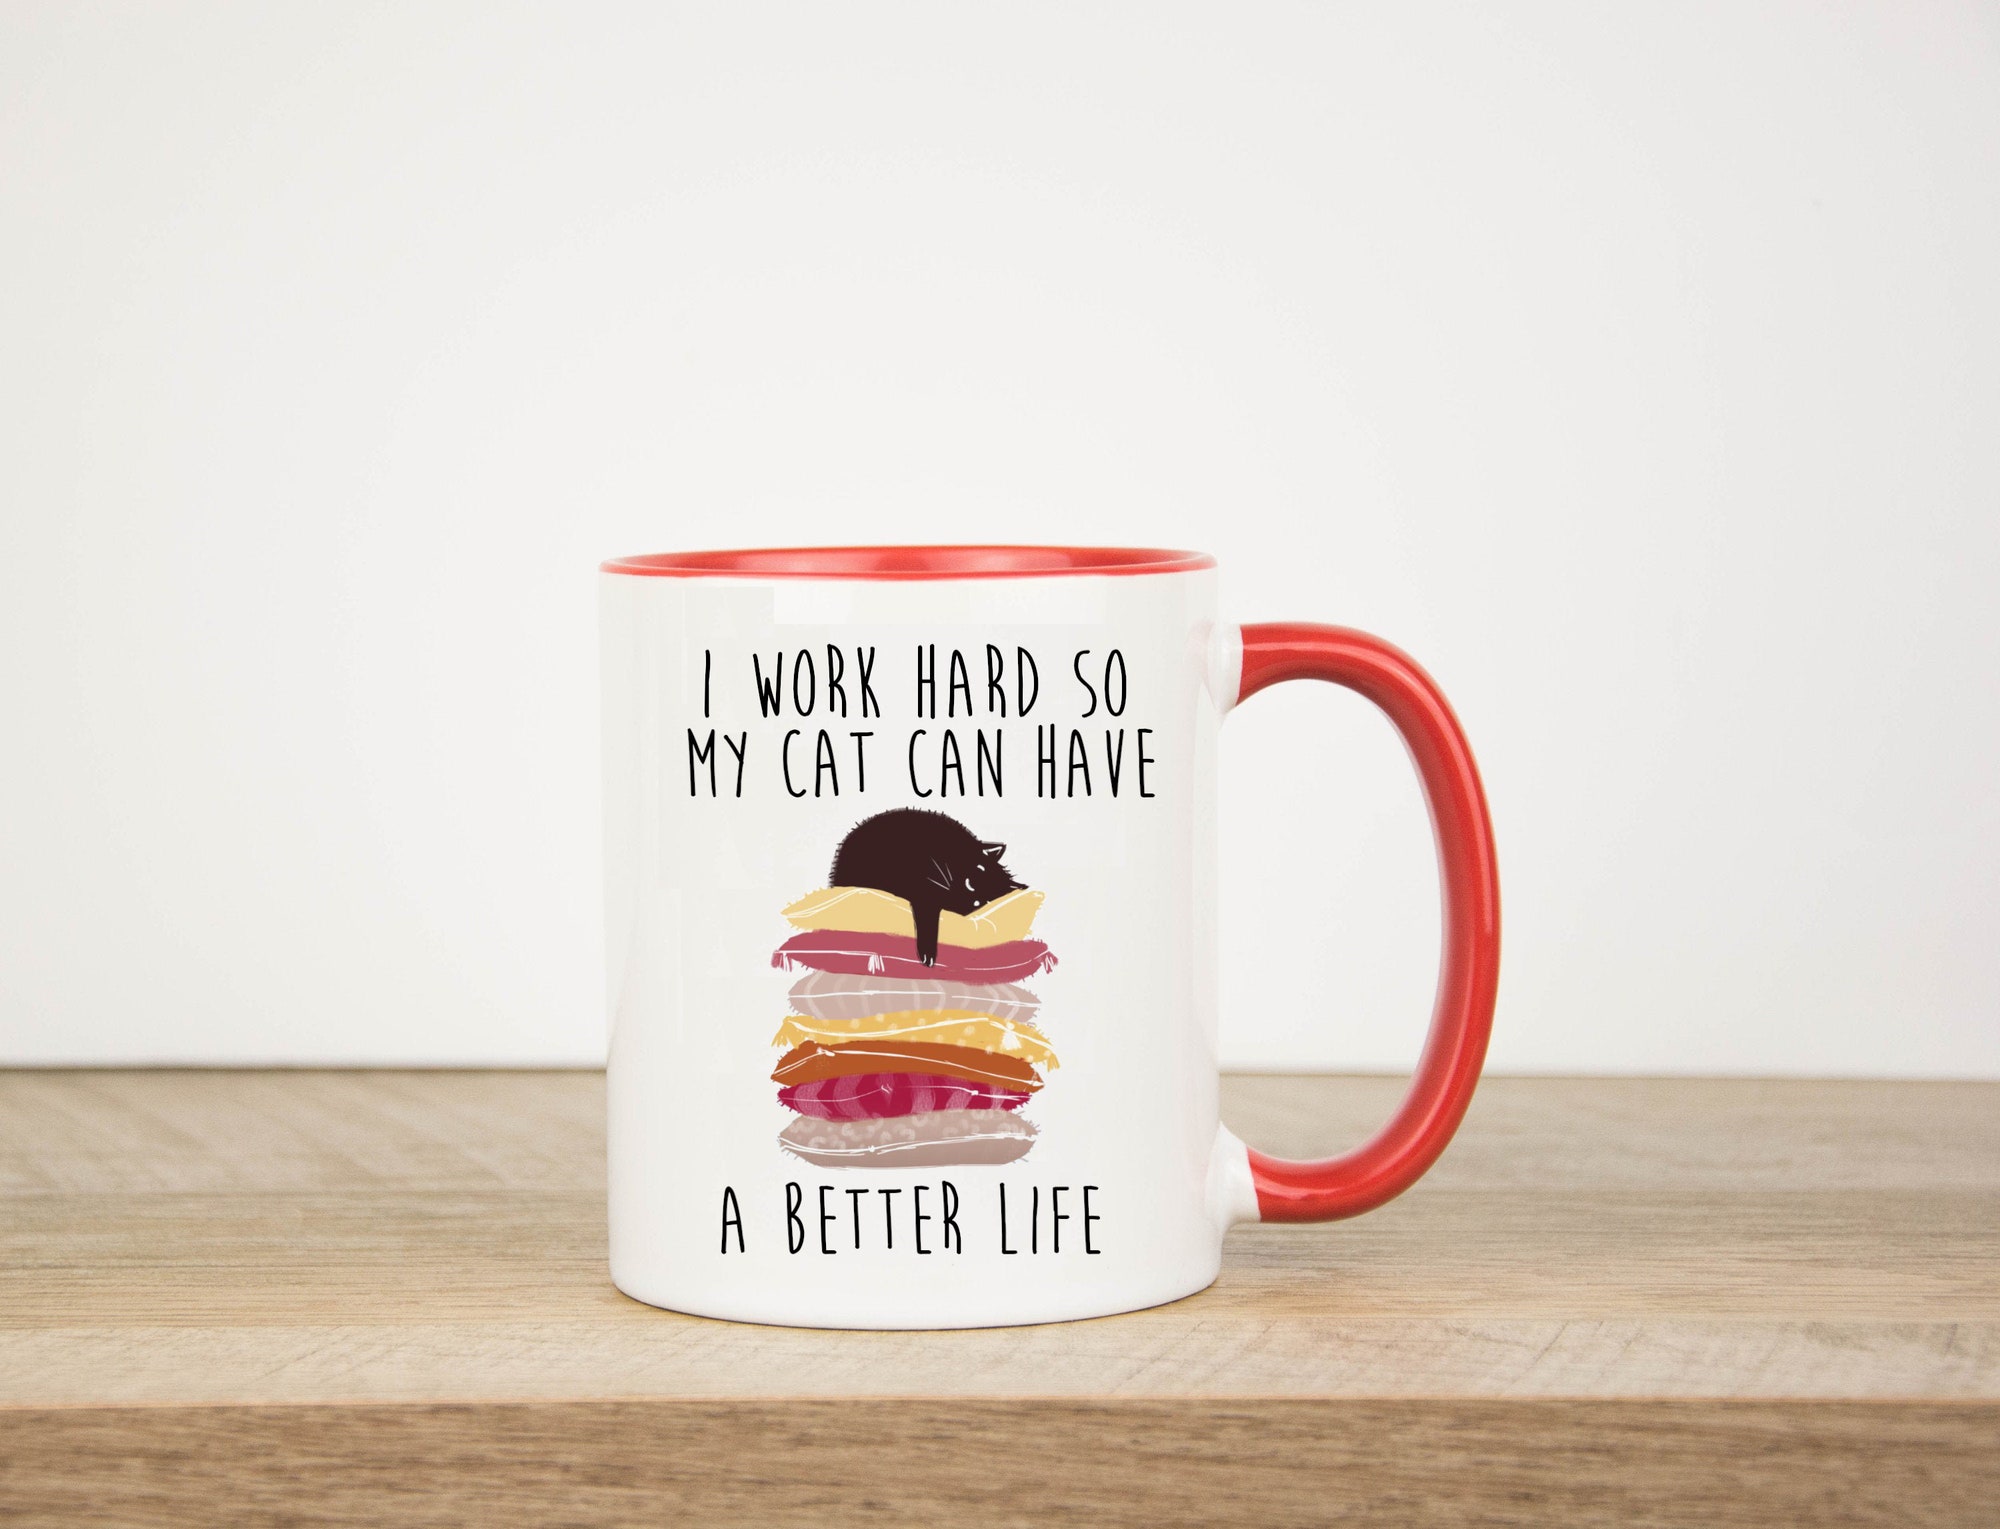 I Work Hard So My Cat Can Have a better Life Mug